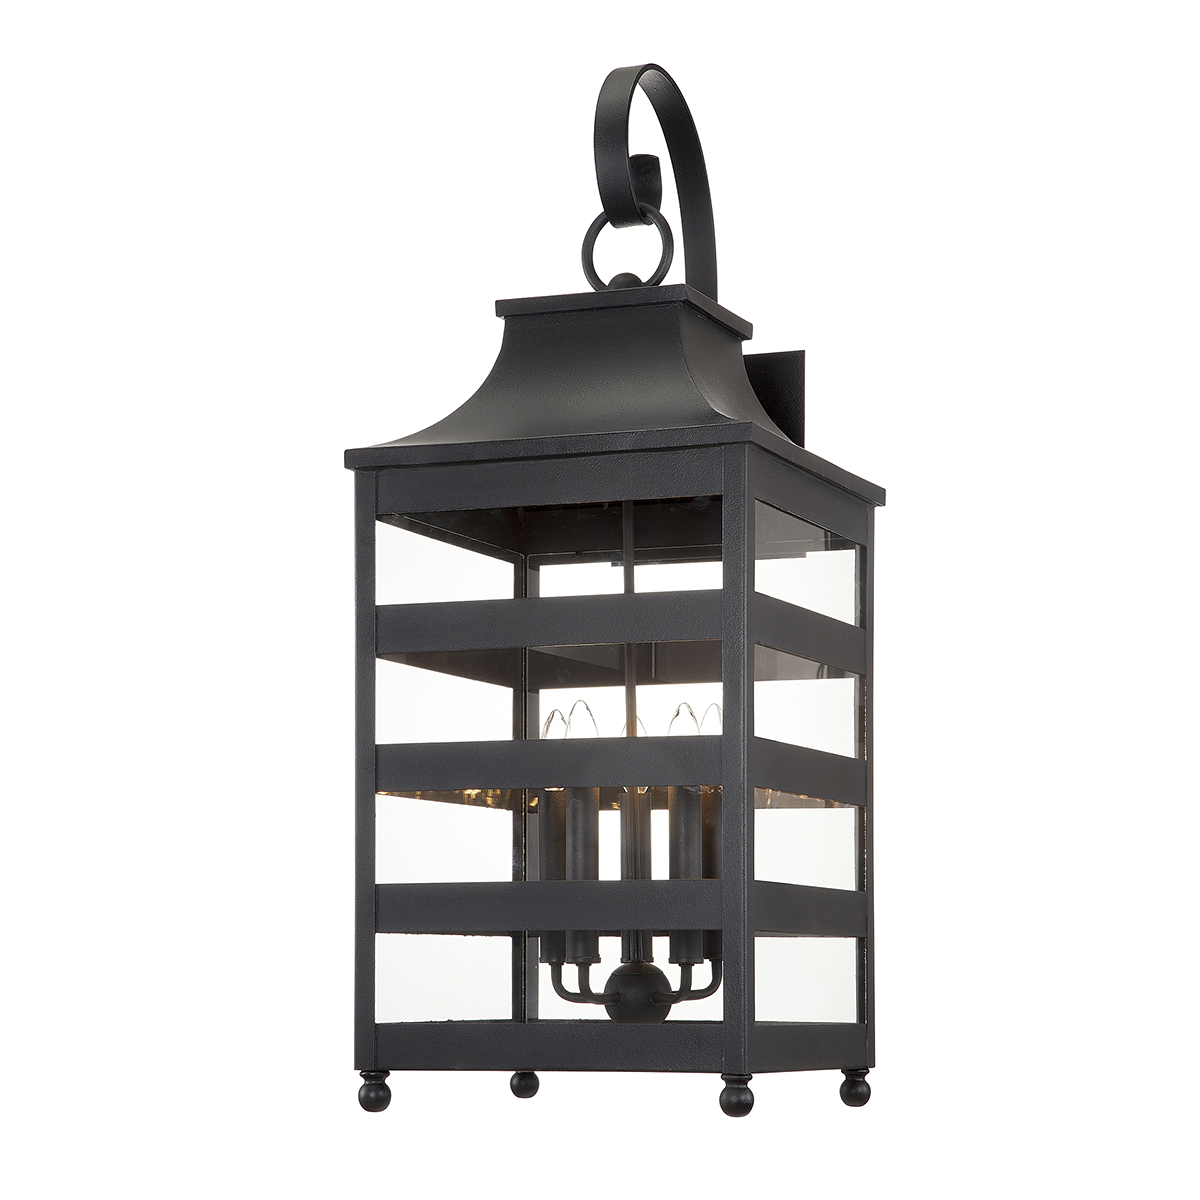 Troy Lighting HOLSTROM 5LT WALL B7434 Outdoor l Wall Troy Lighting FORGED IRON  